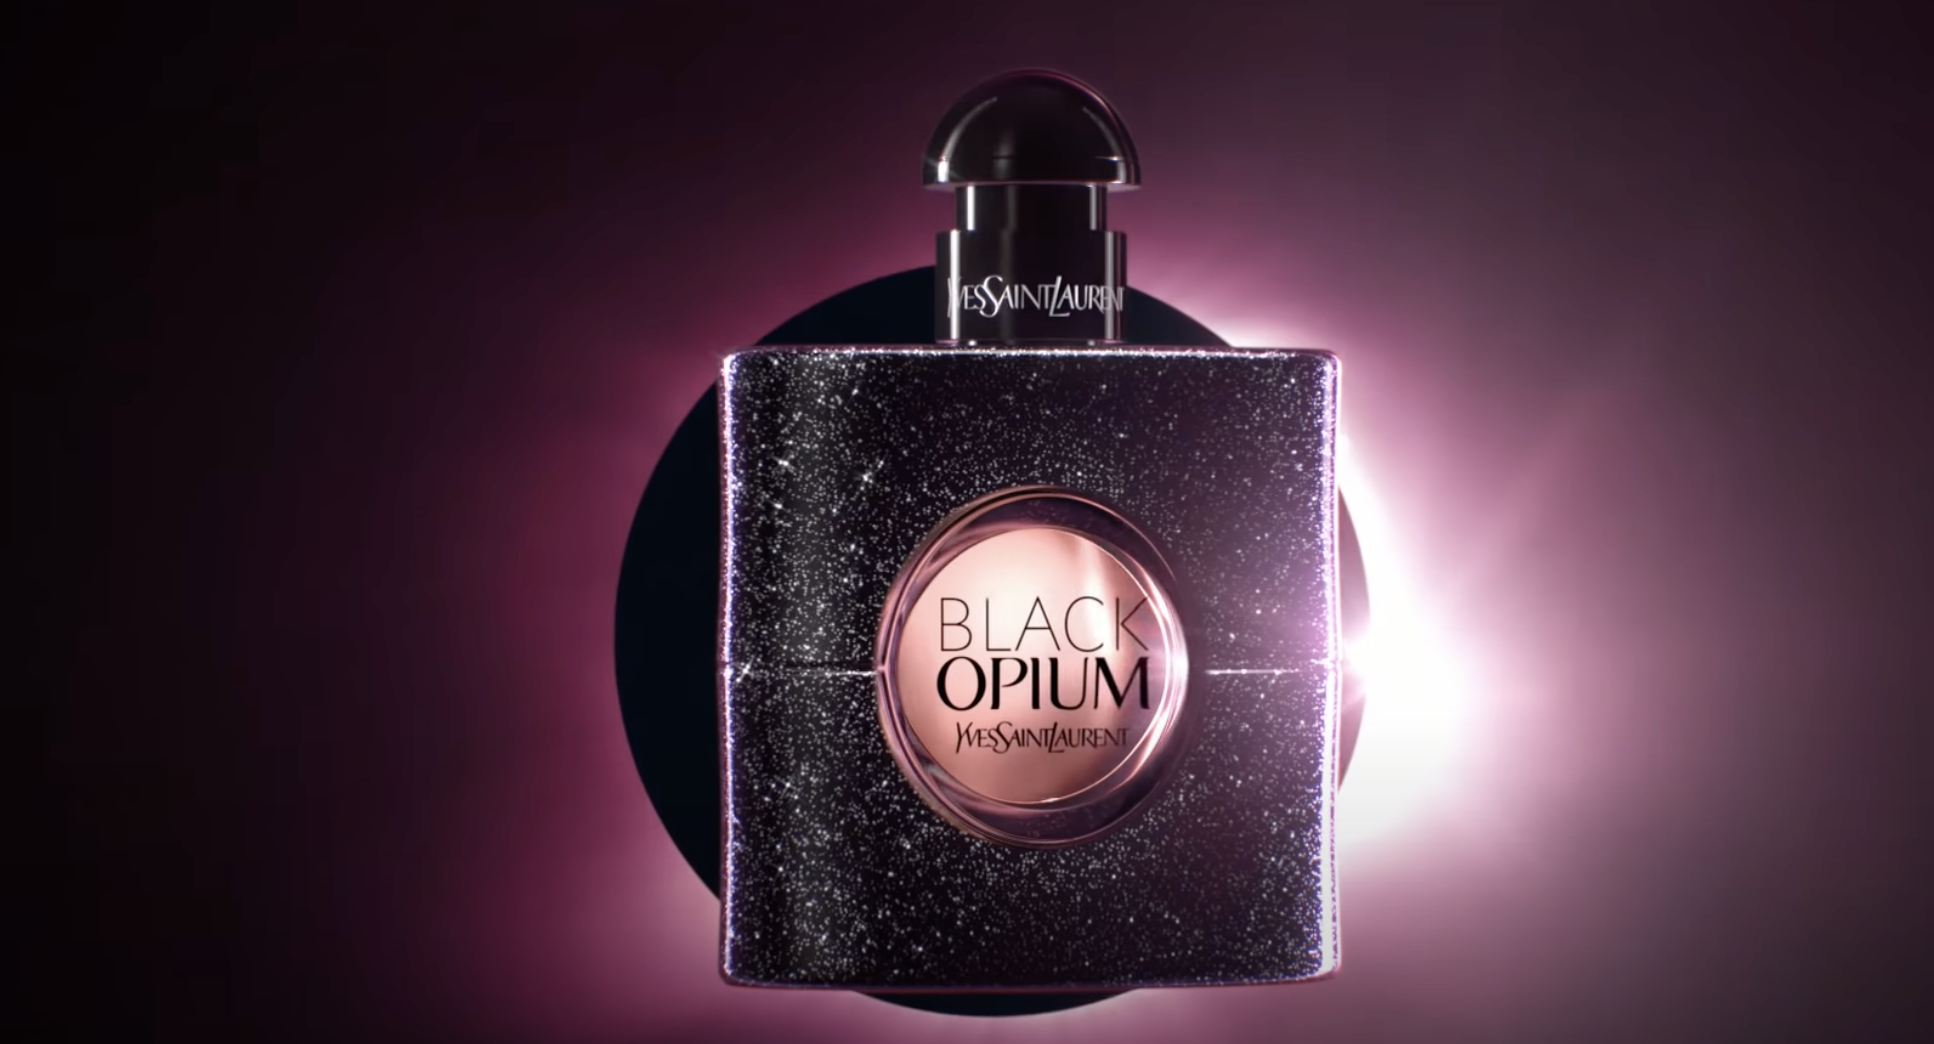 Yves Saint Laurent Black Opium Review – Potent, Stunning, and Fun